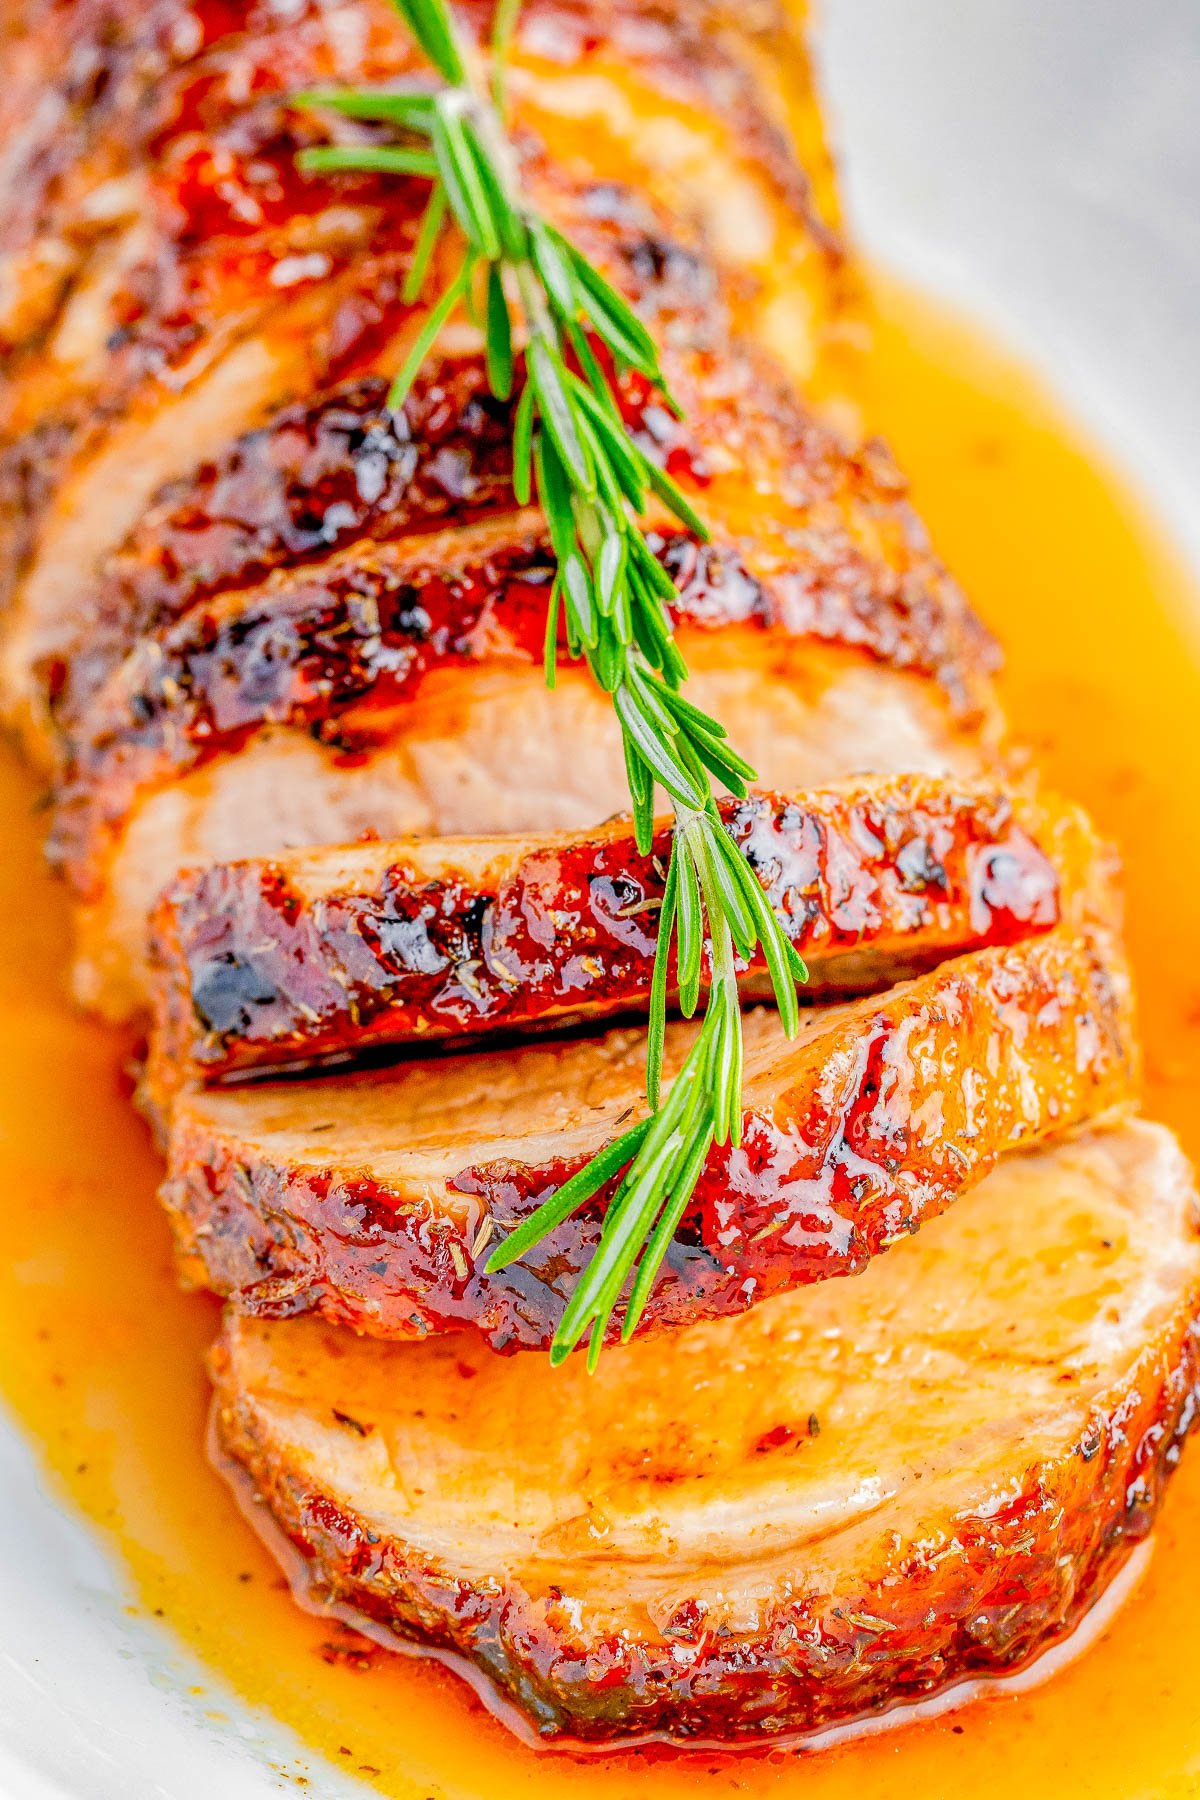 Glazed Pork Loin Roast — Pork loin is first coated in a FLAVOR-PACKED dry spice rub, then topped with a tangy brown sugar glaze before being roasted. EASY enough to make on busy weeknights, but IMPRESSIVE enough to serve to guests or make for the holidays! 